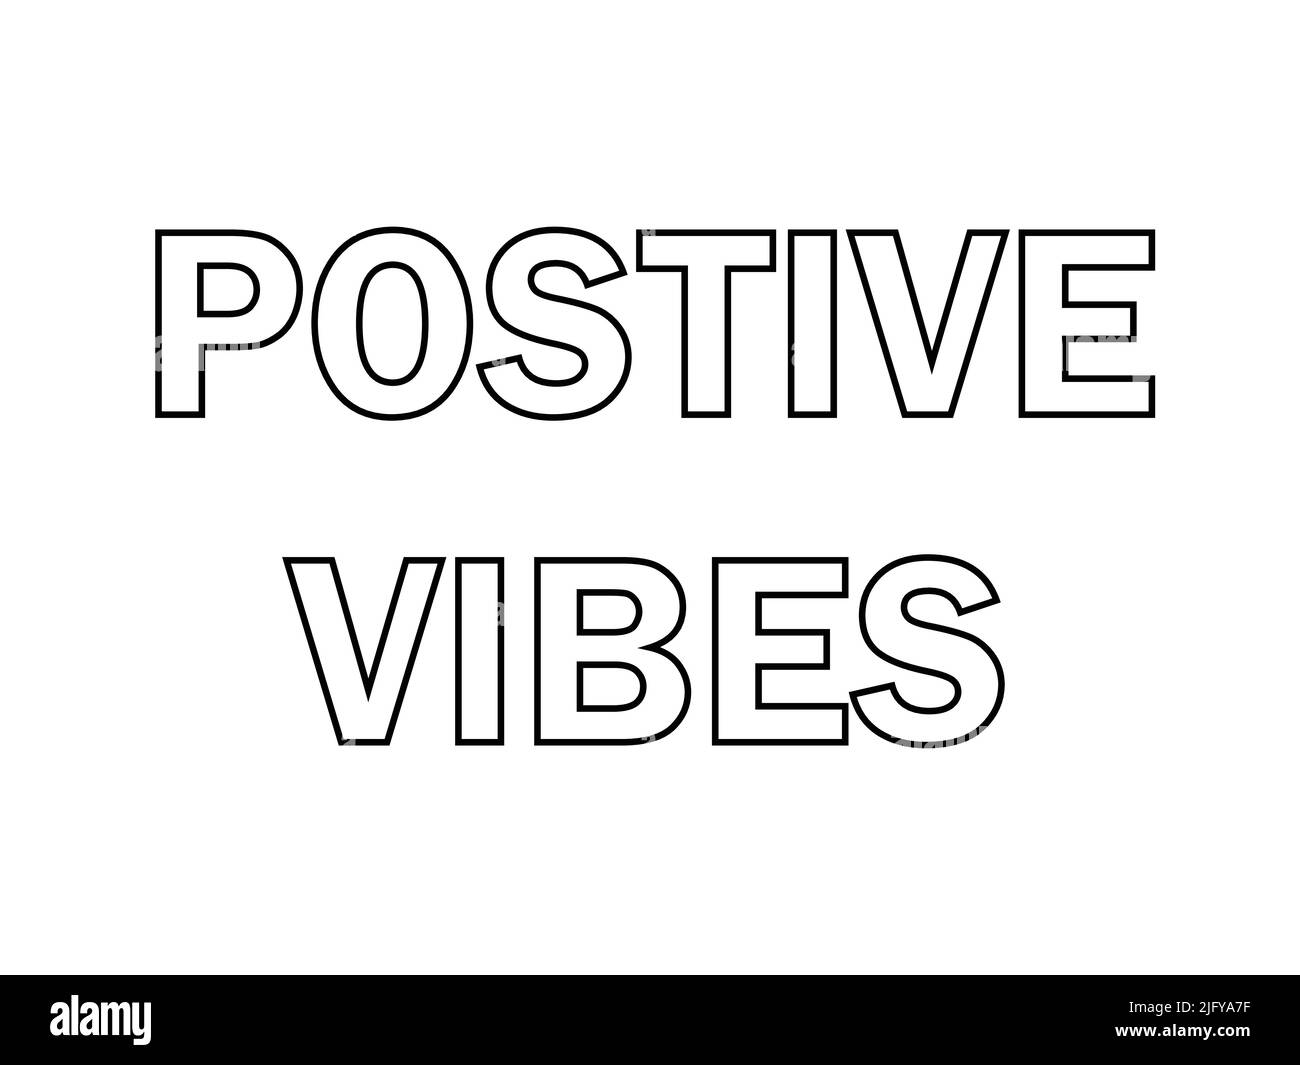 Positive vibes. motivational text inspirational quotes. with white background Stock Vector